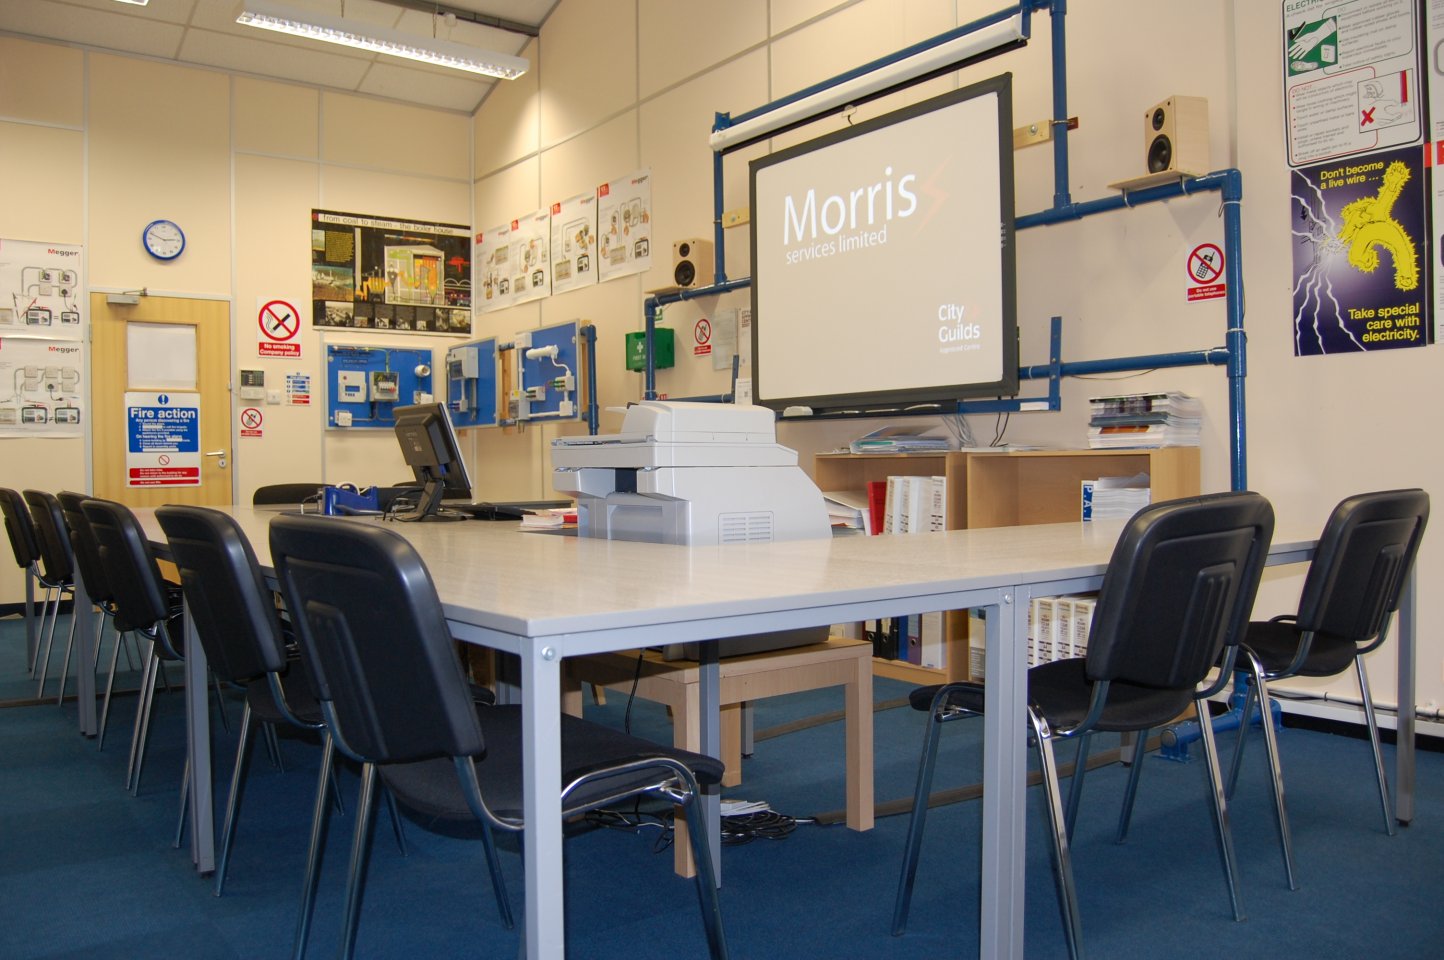 electrical training classroom at morris services ltd